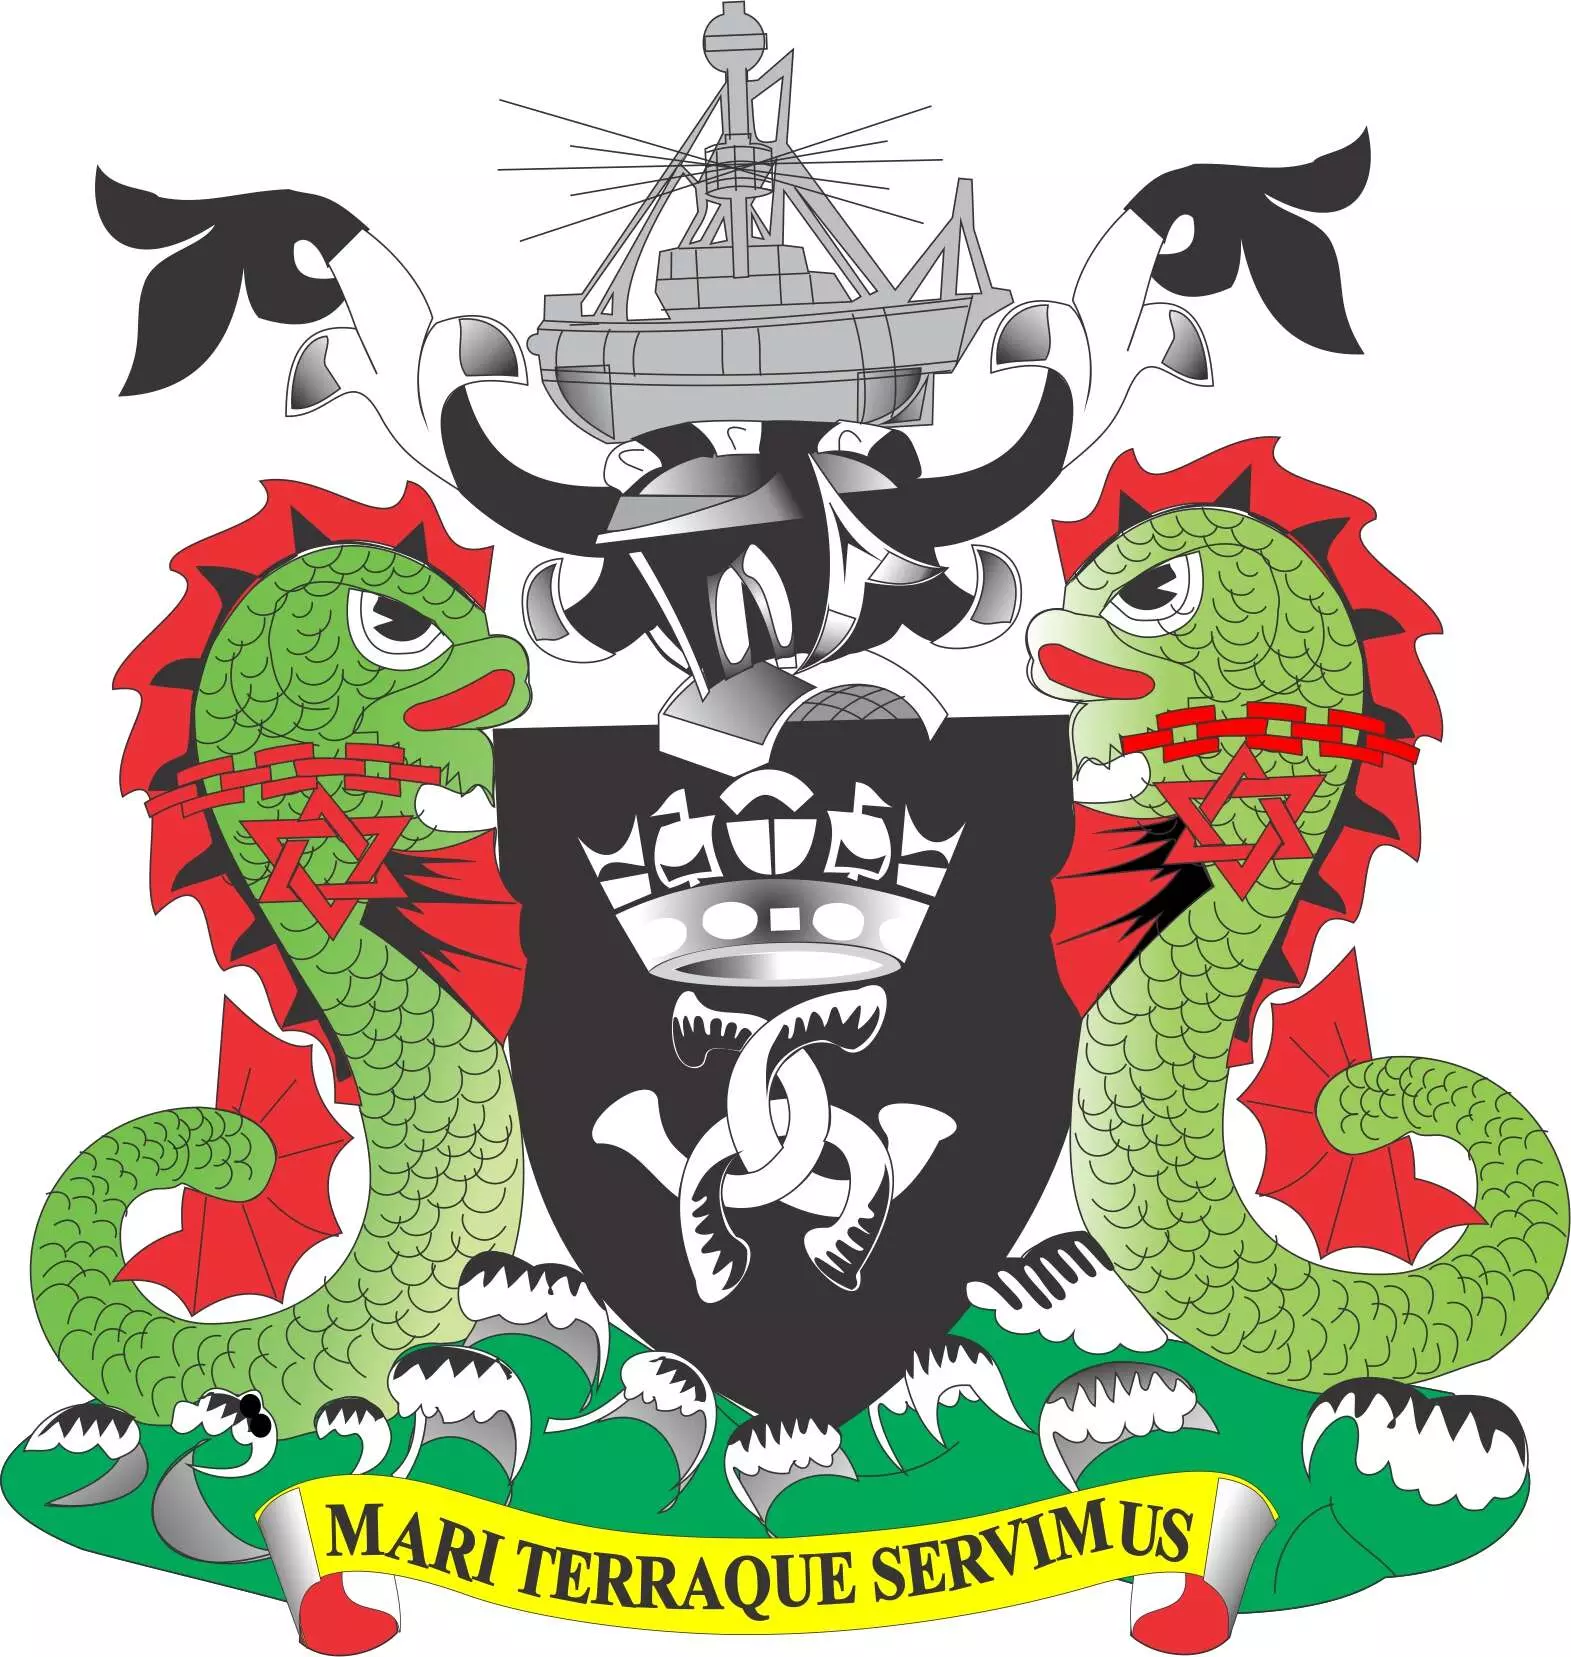 We’re repositioning NPA for efficiency, safety – MD